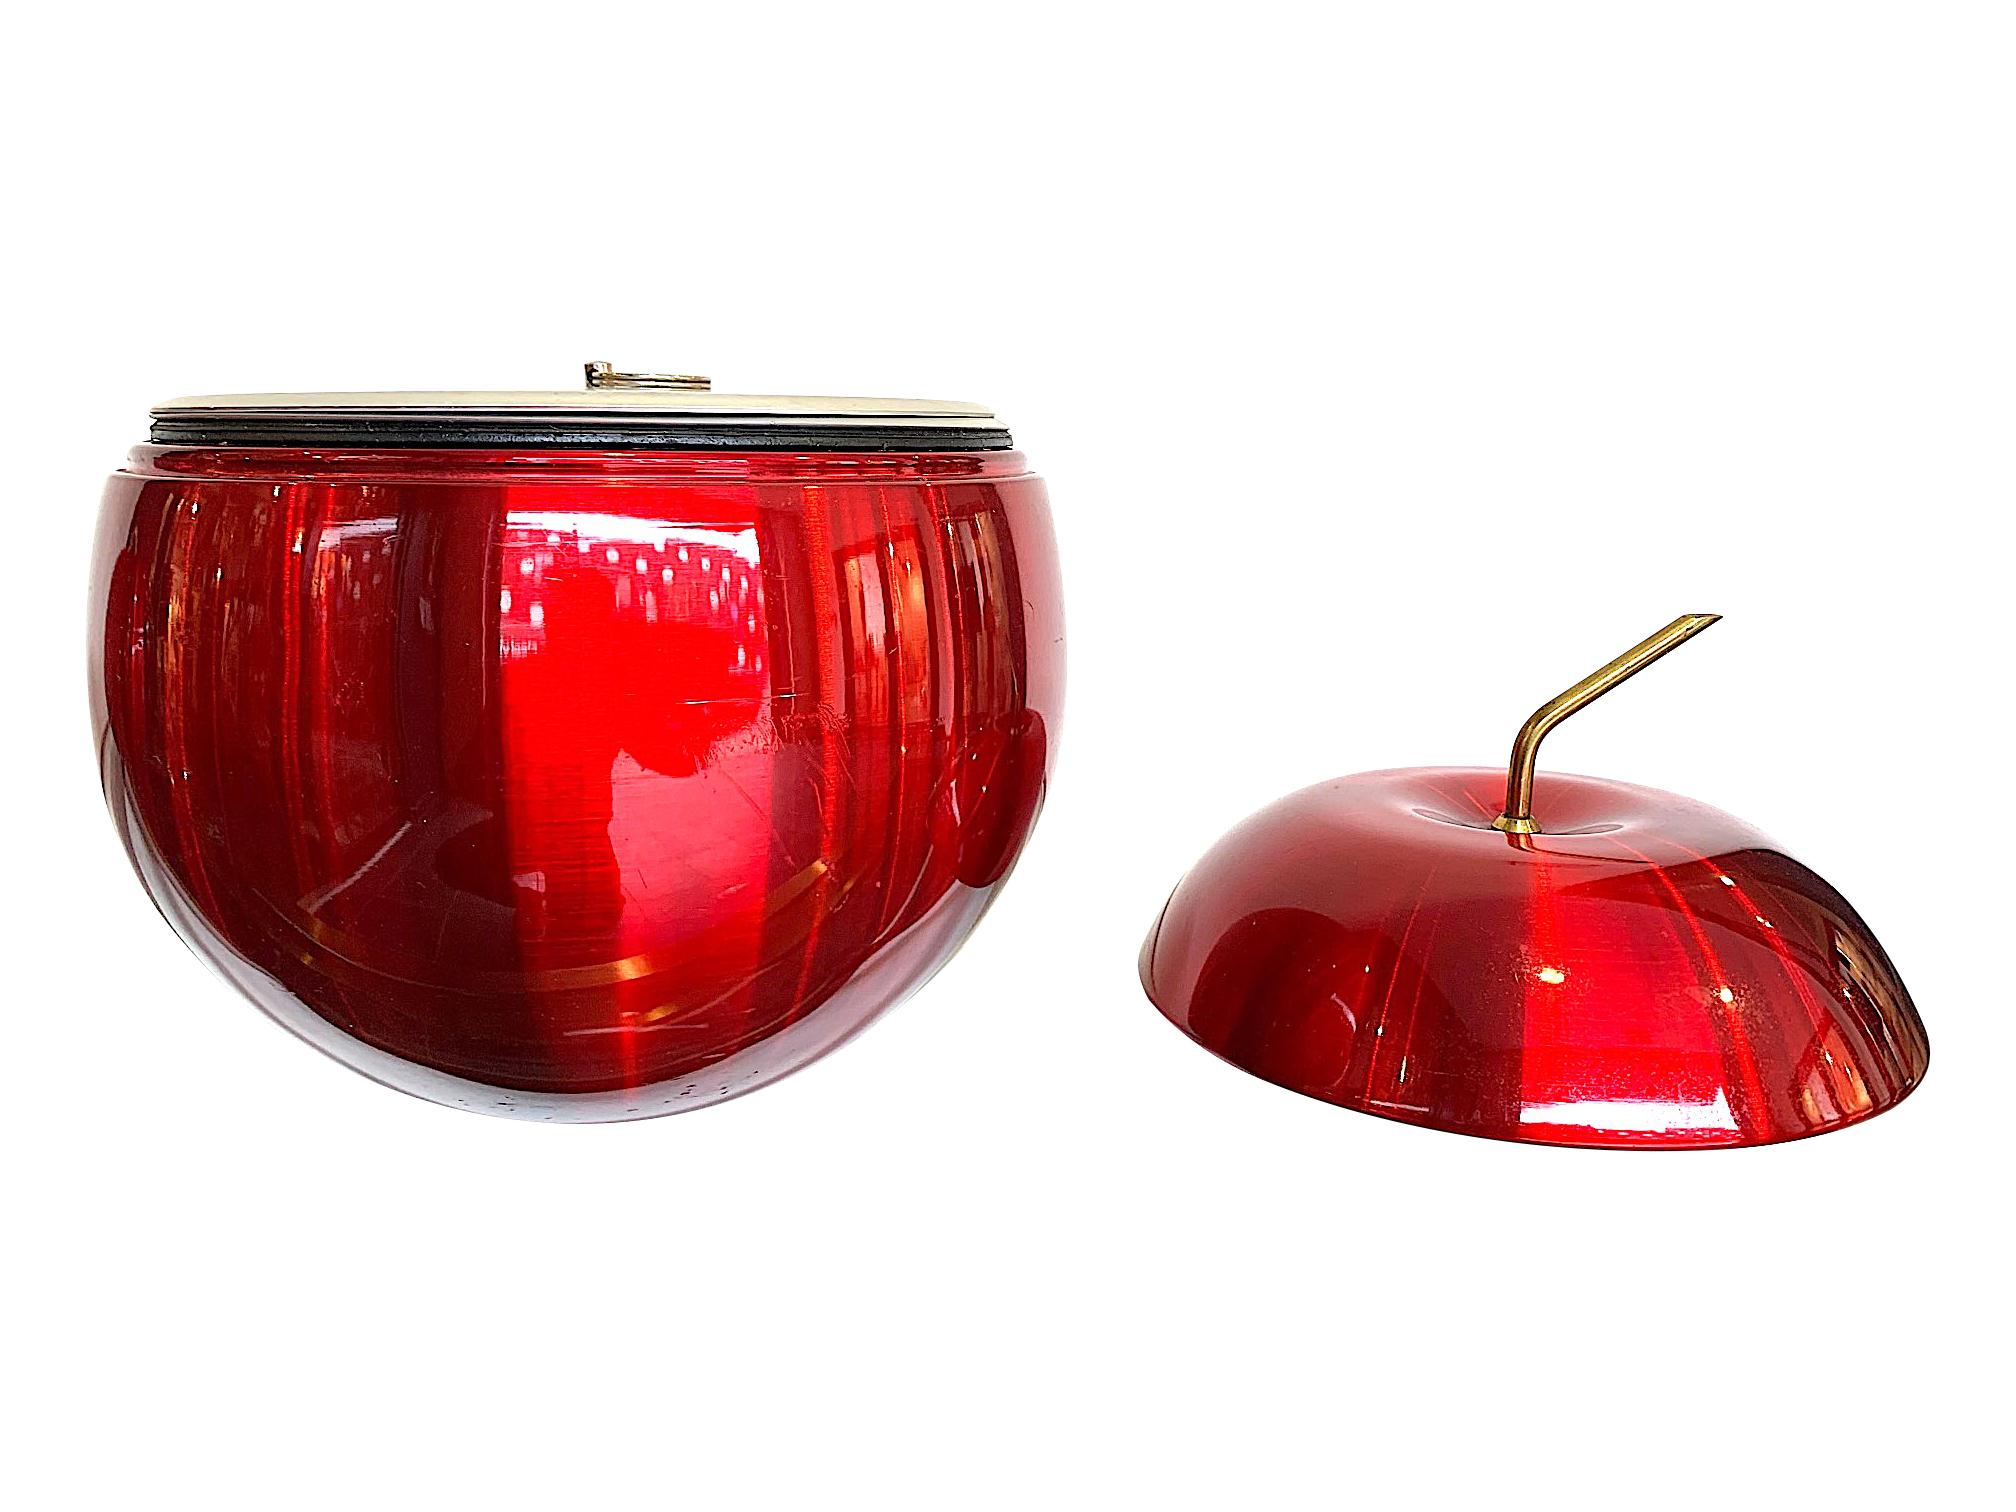 Mid-Century Modern 1970s Cherry Ice Bucket by Daydream in Anodised Vibrant Red with Brass Handle